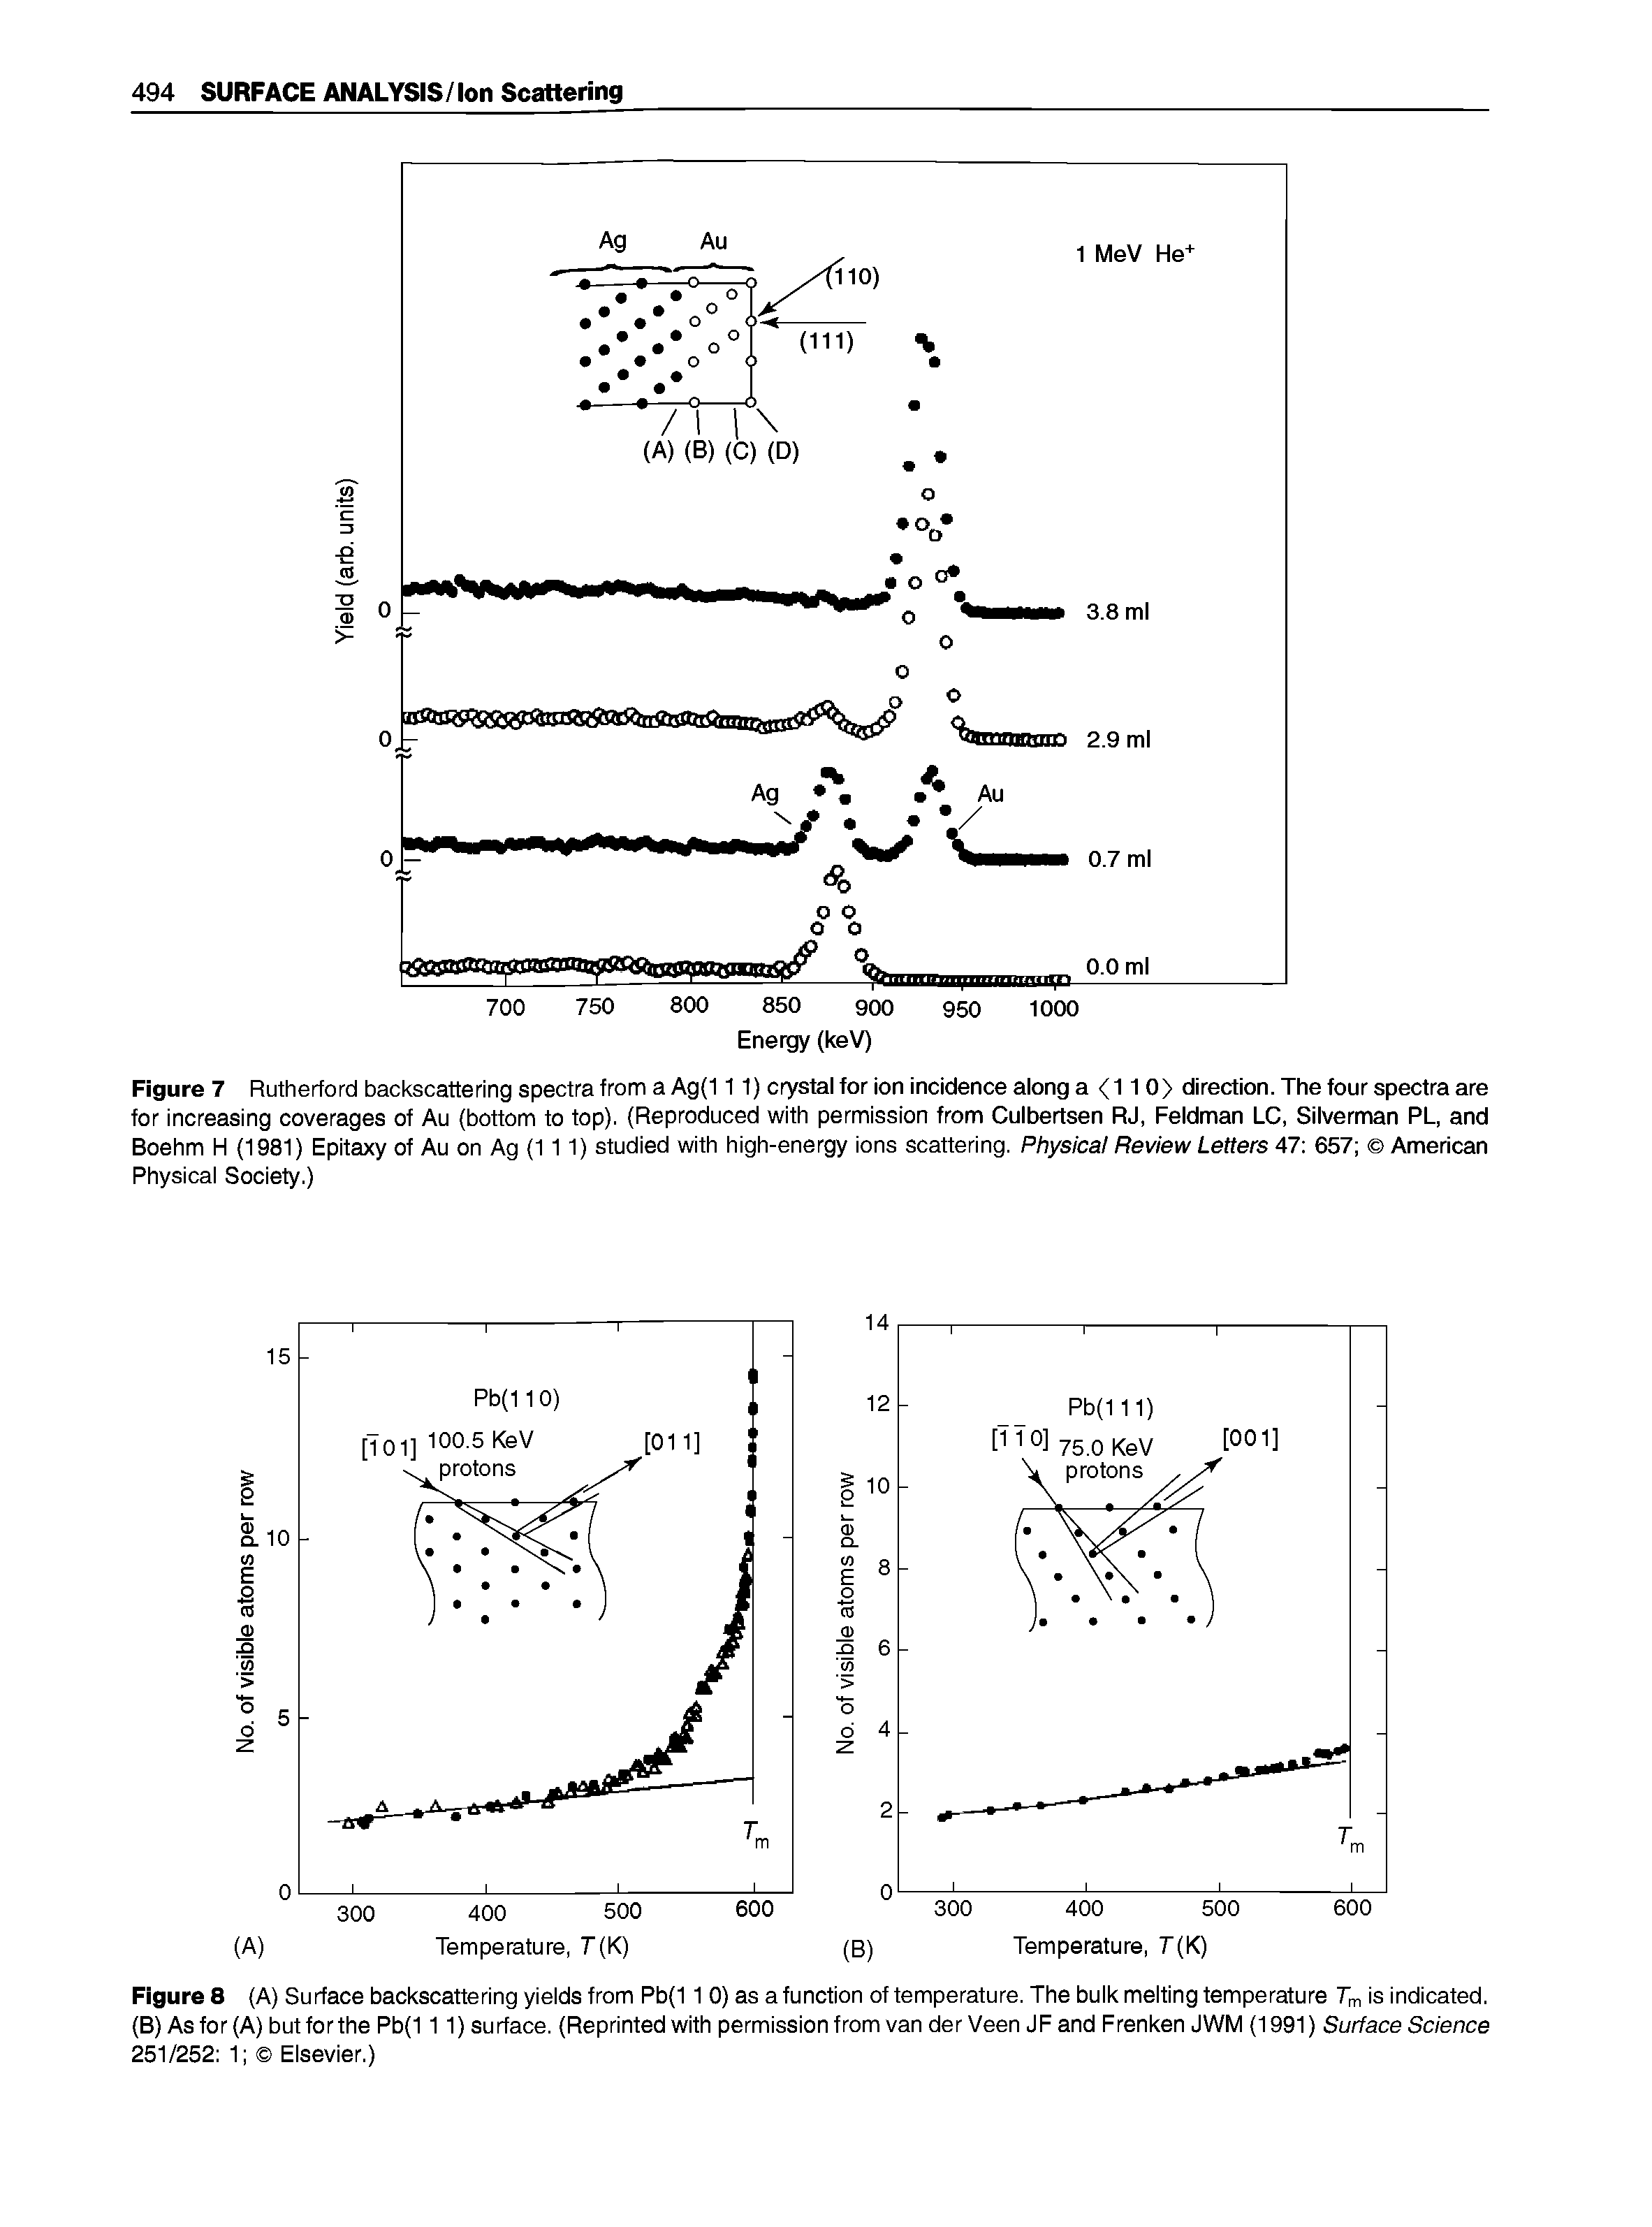 Figure 8 (A) Surface backscattering yields from Pb(11 0) as a function of temperature. The bulk melting temperature Tm is indicated. (B) As for (A) but for the Pb(111) surface. (Reprinted with permission from van der Veen JF and Frenken JWM (1991) Surface Science 251/252 1 Elsevier.)...